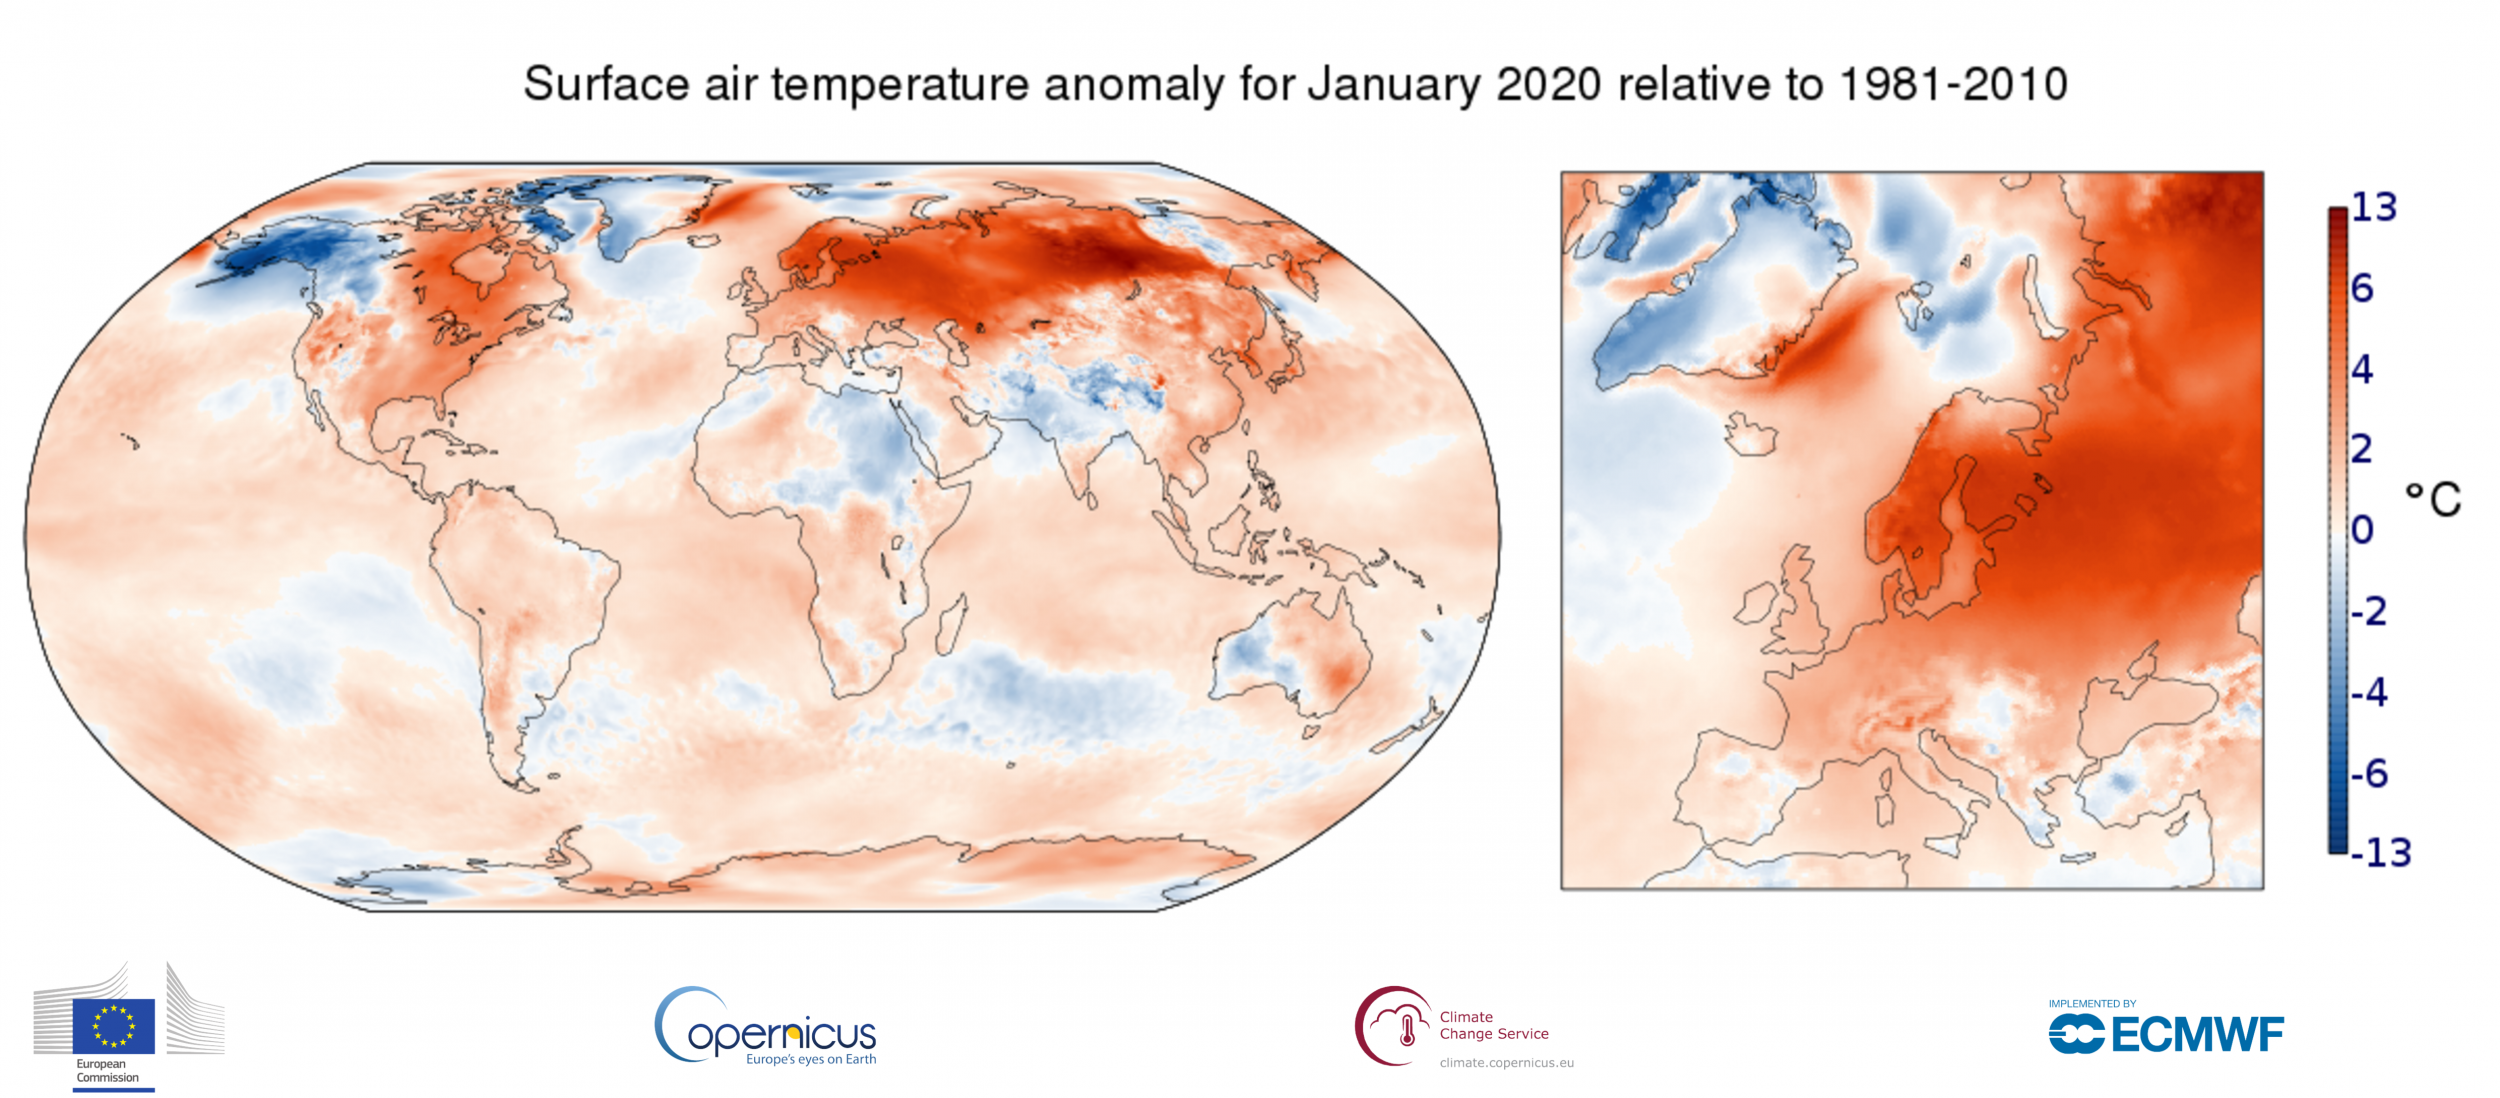 Some areas in north east Europe experienced temperatures more than 6C above the 1981-2010 January average